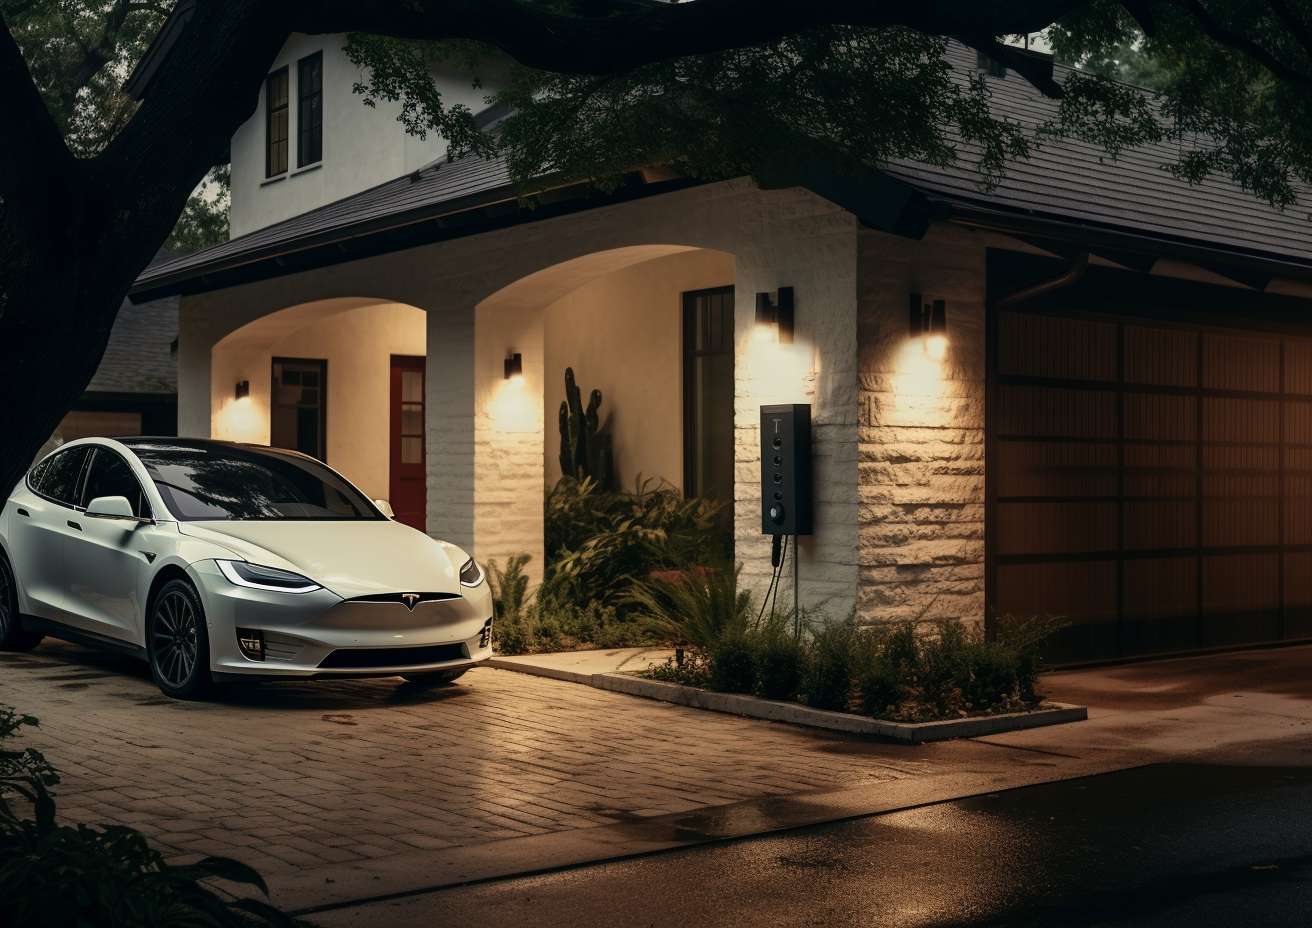 A Tesla Model X parked in front of a house at night, highlighting the presence of an EV charger installation.